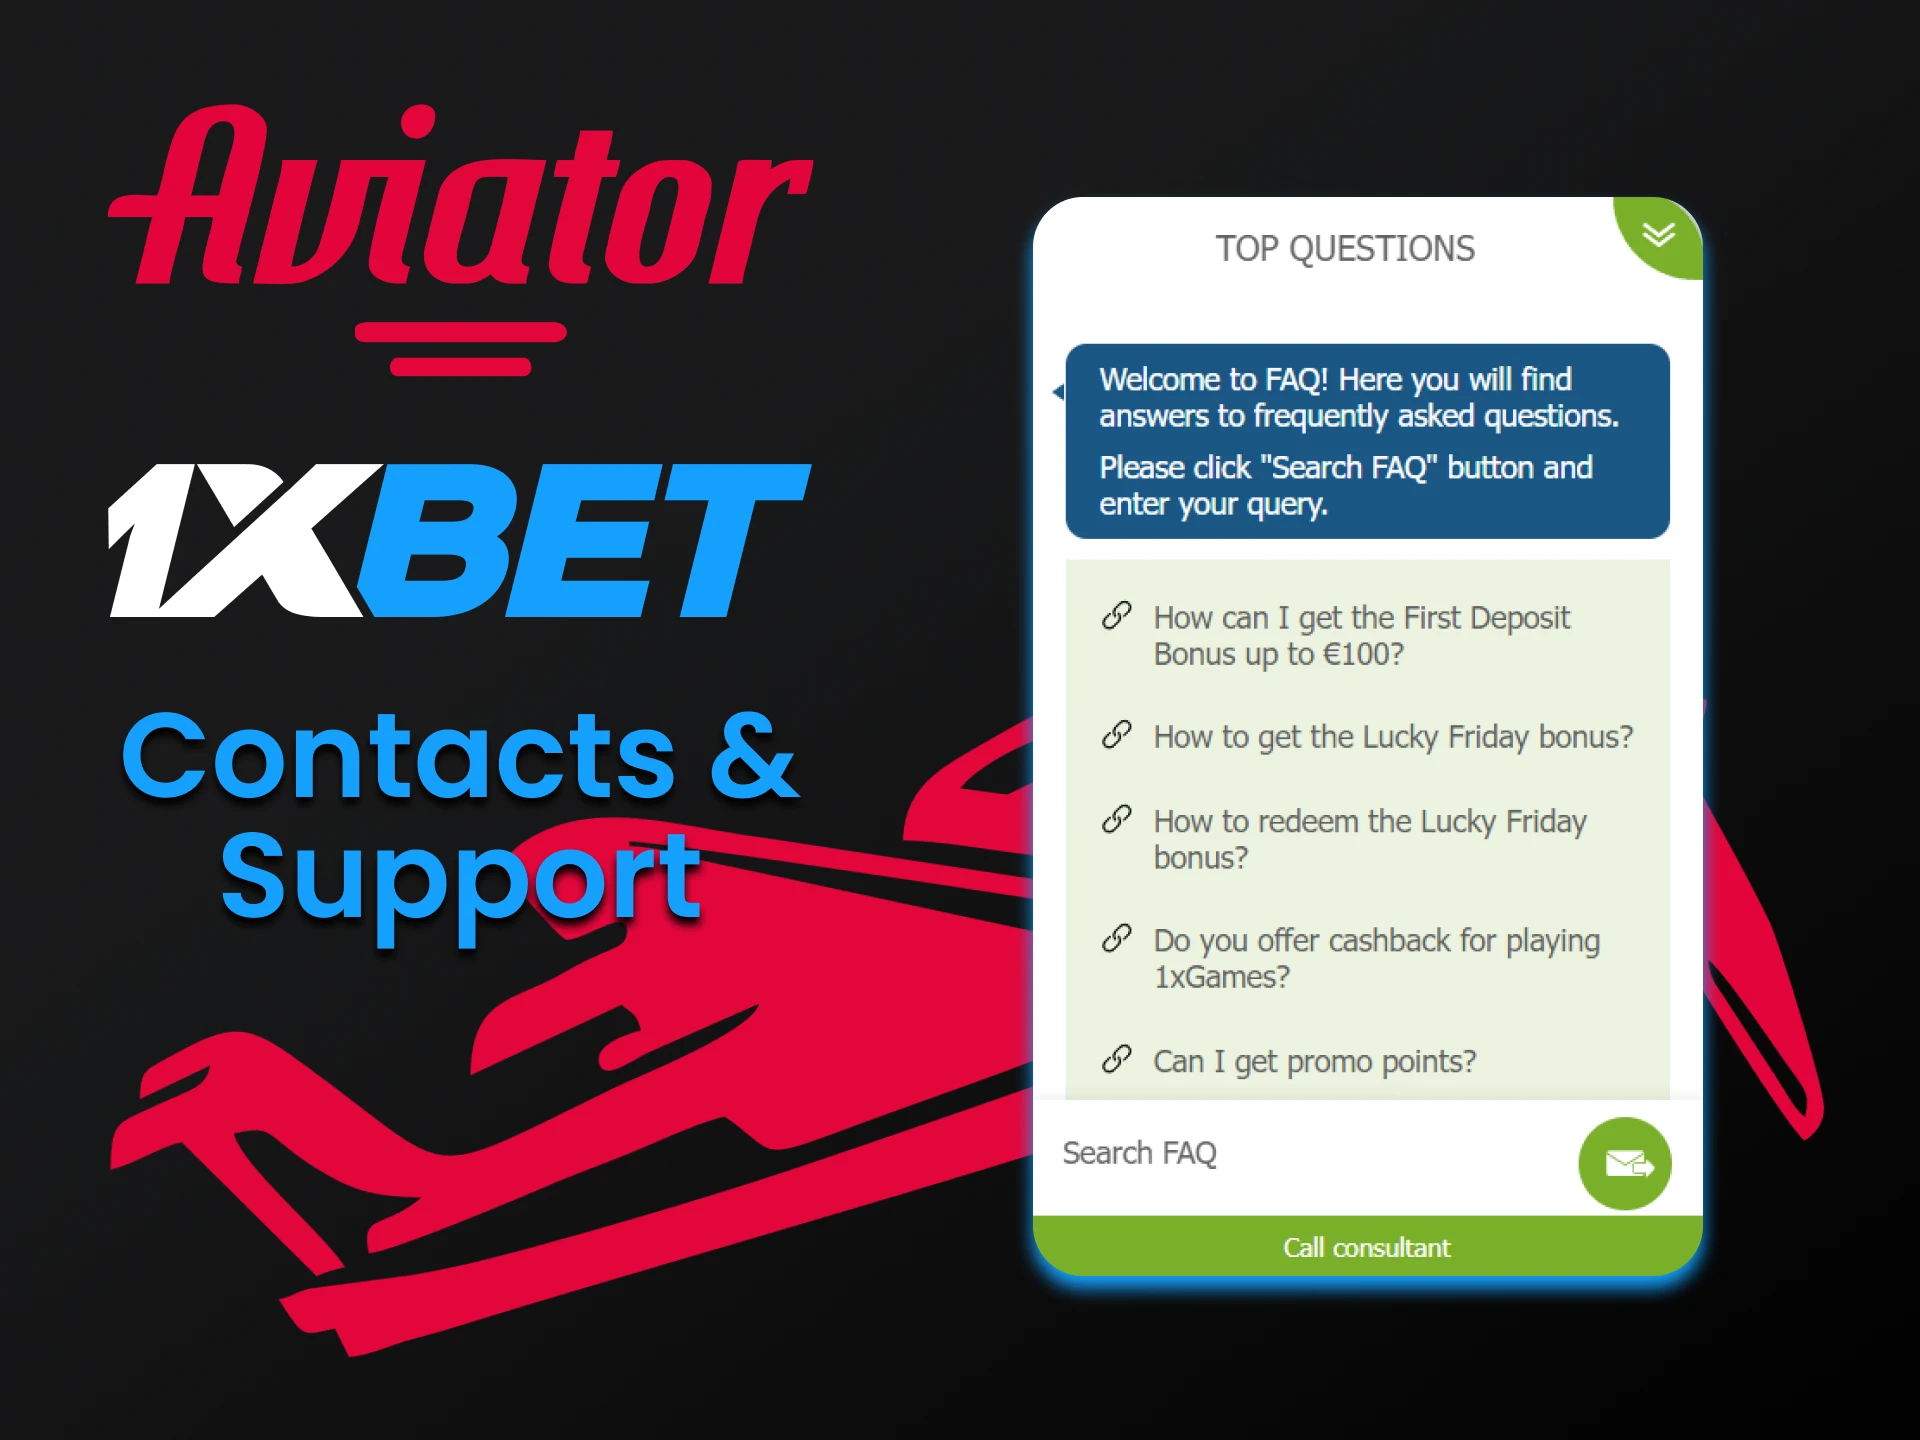 If you have any problems with the game Aviator, you can always report it to the 1xbet team.